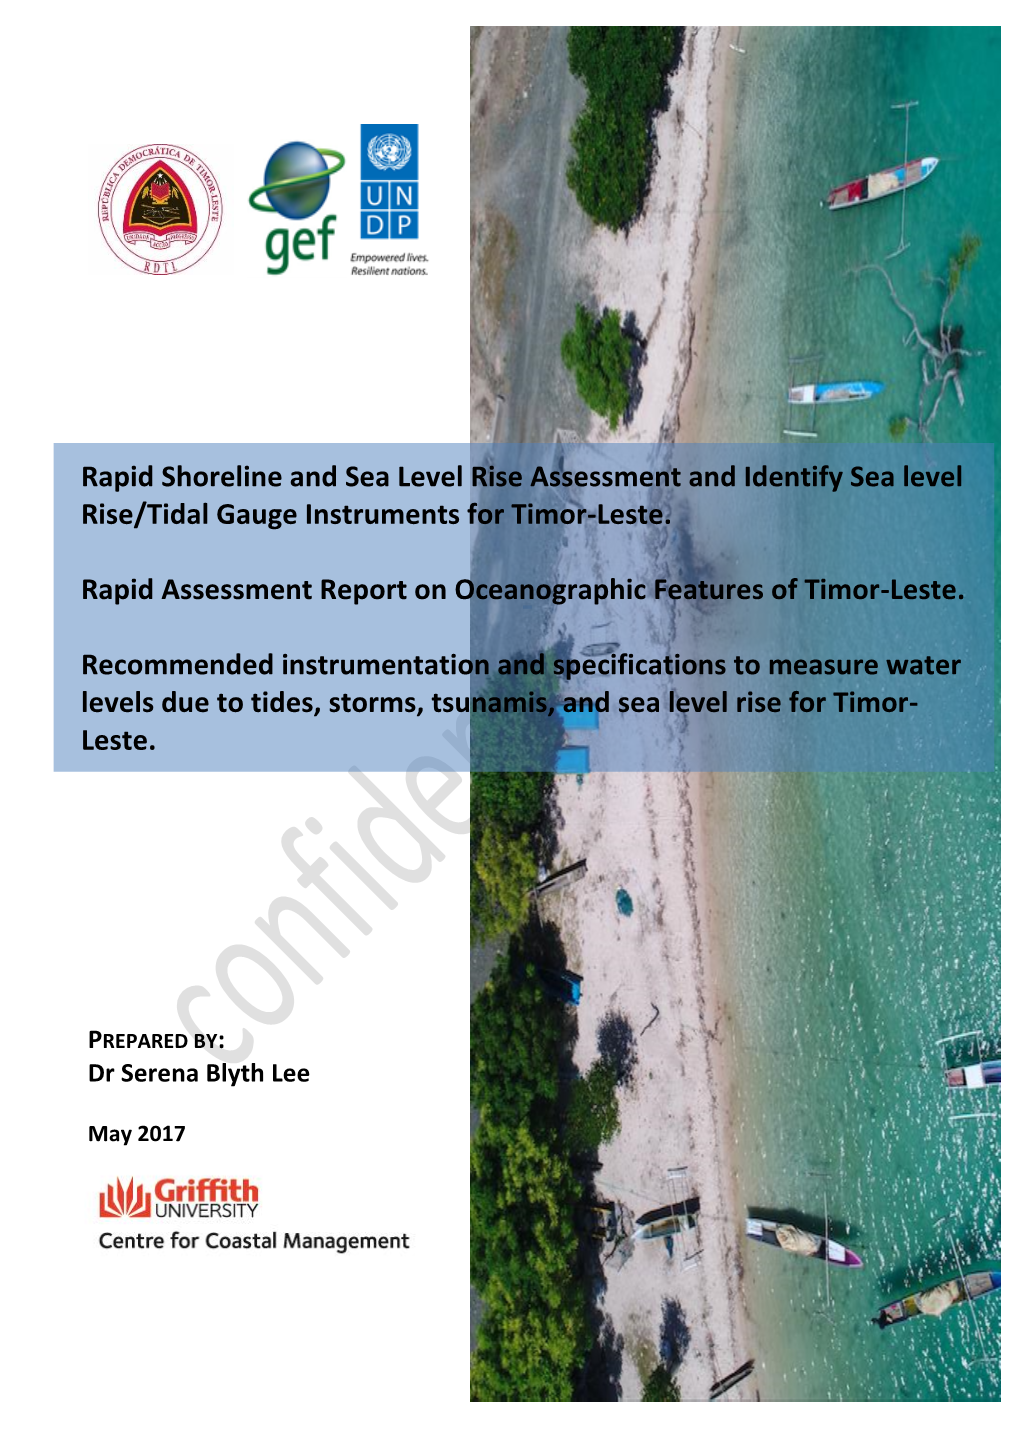 Rapid Shoreline and Sea Level Rise Assessment and Identify Sea Level Rise/Tidal Gauge Instruments for Timor-Leste